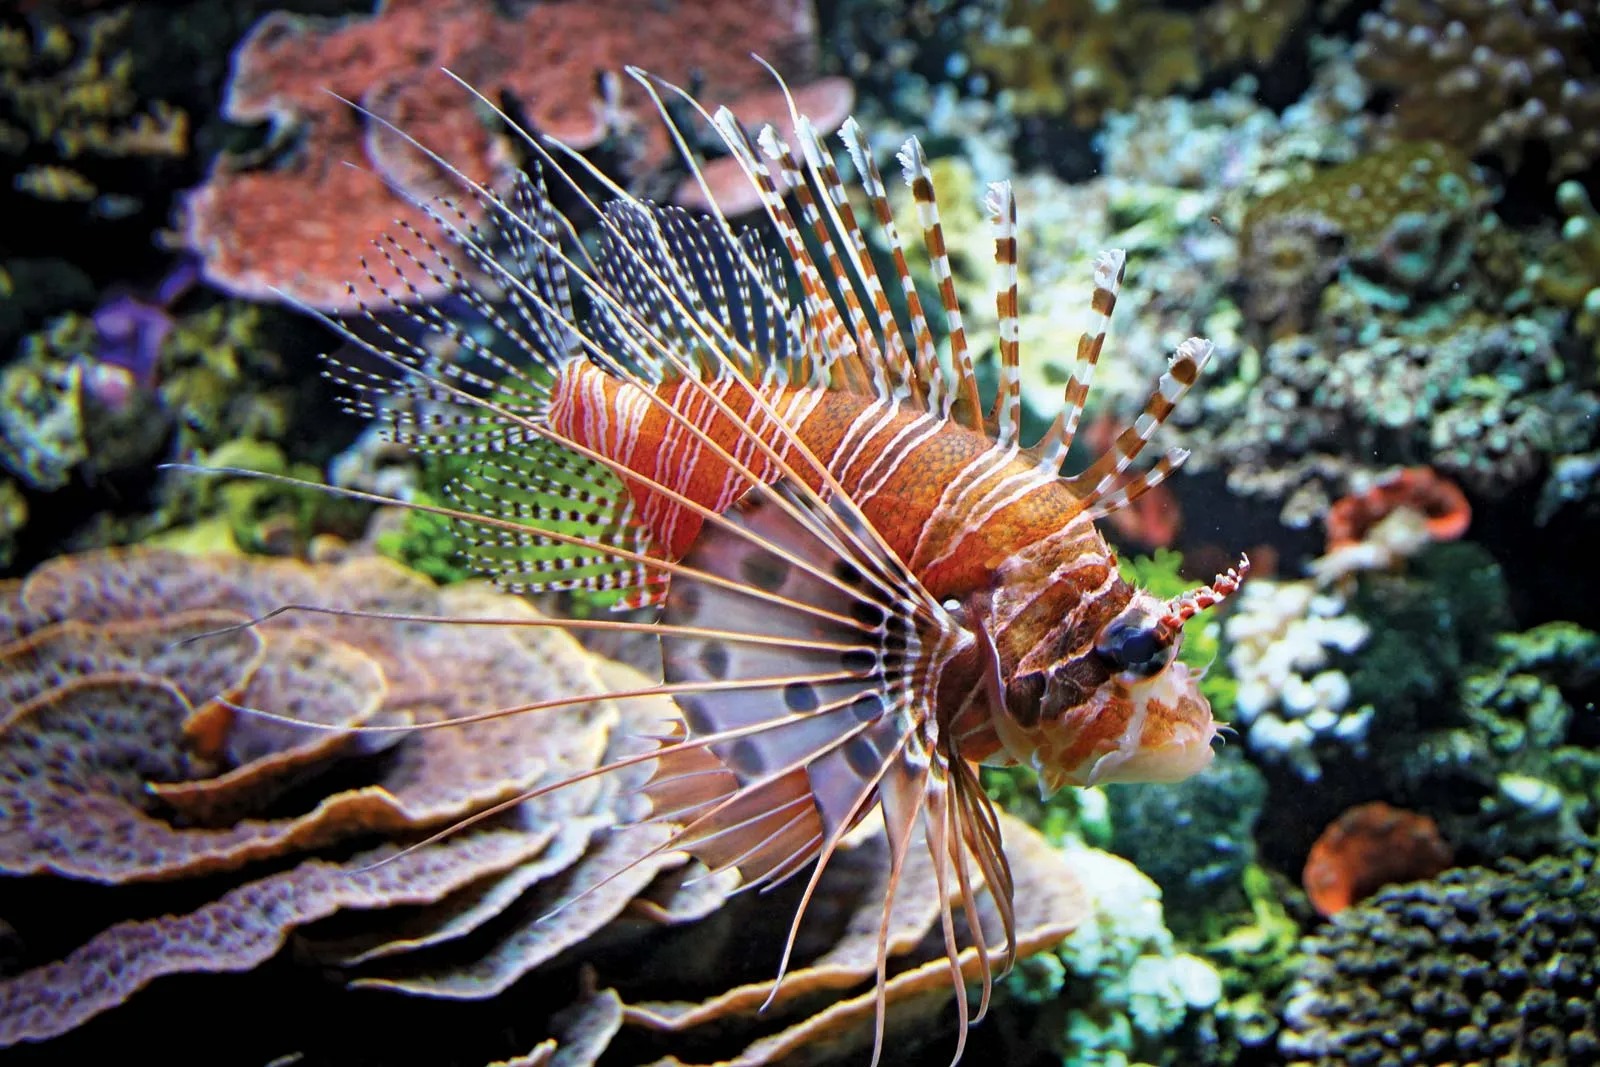 Can You Beat Your Friends in This Quiz That's All About Animals? Red lionfish